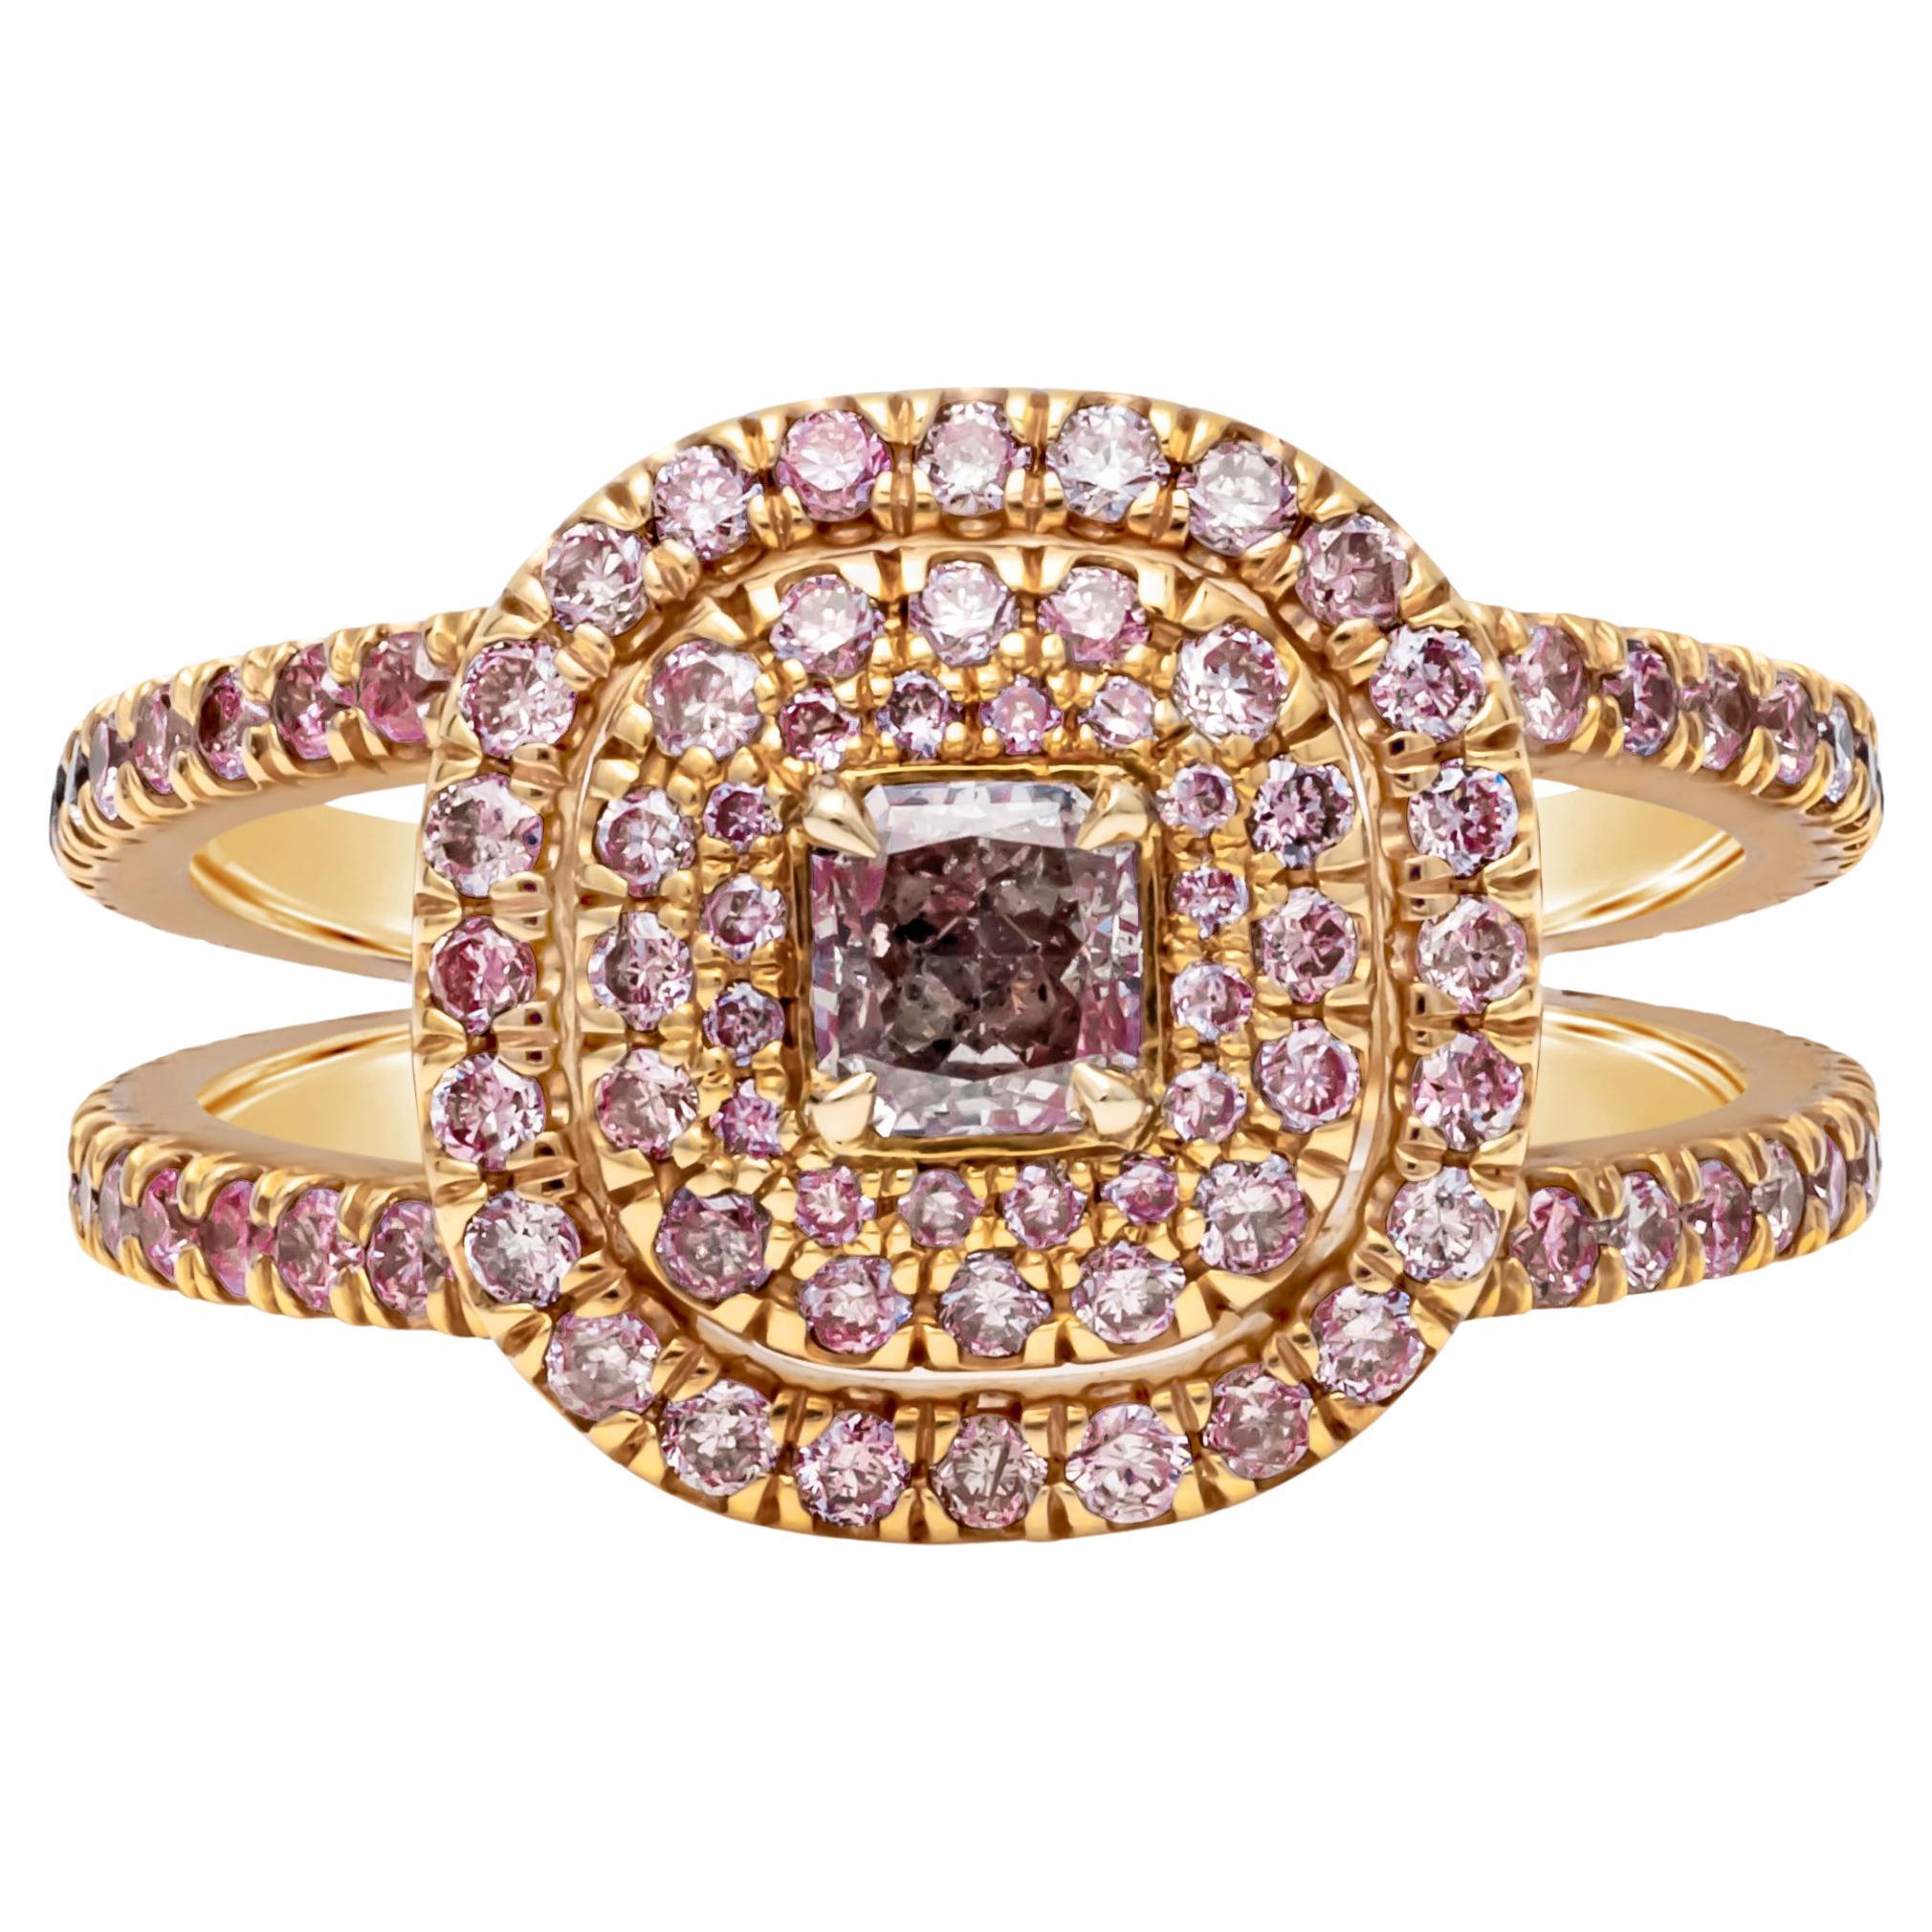 GIA Certified 0.31 Carats Radiant Cut Purple Pink Diamond Halo Engagement Ring For Sale